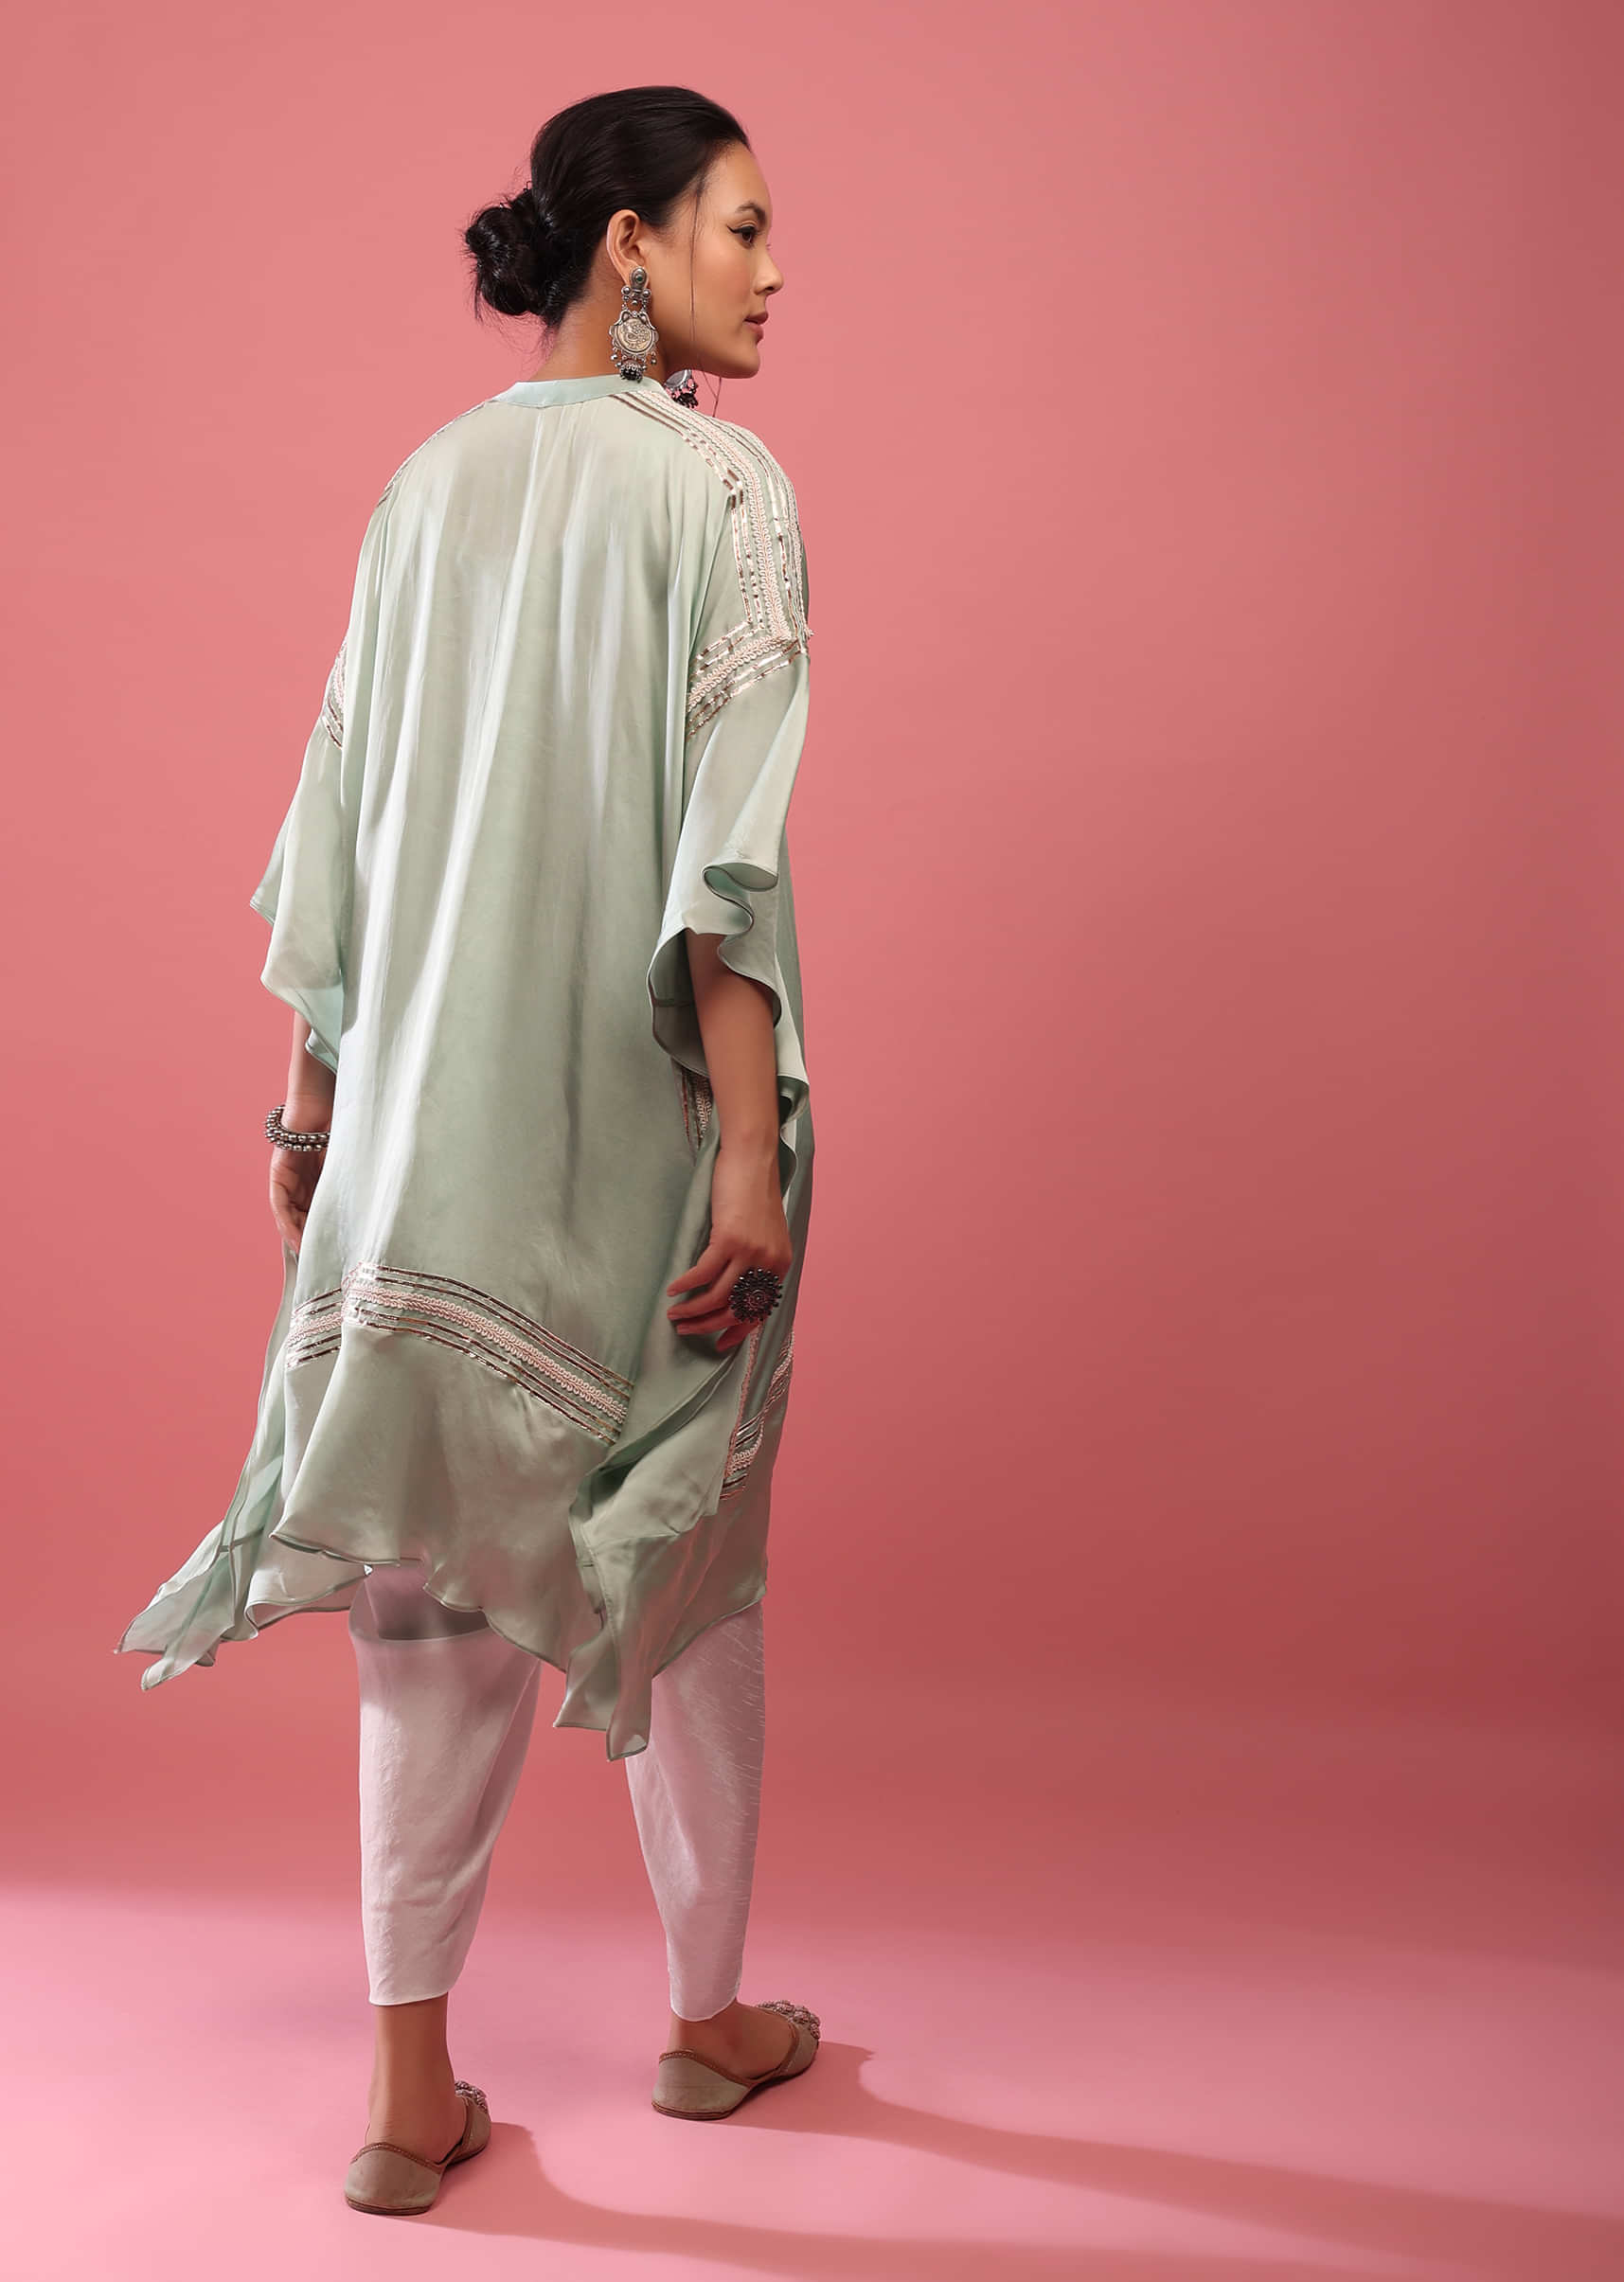 Powder Green Kaftan Suit Embroidered In Satin With Dhoti Pants